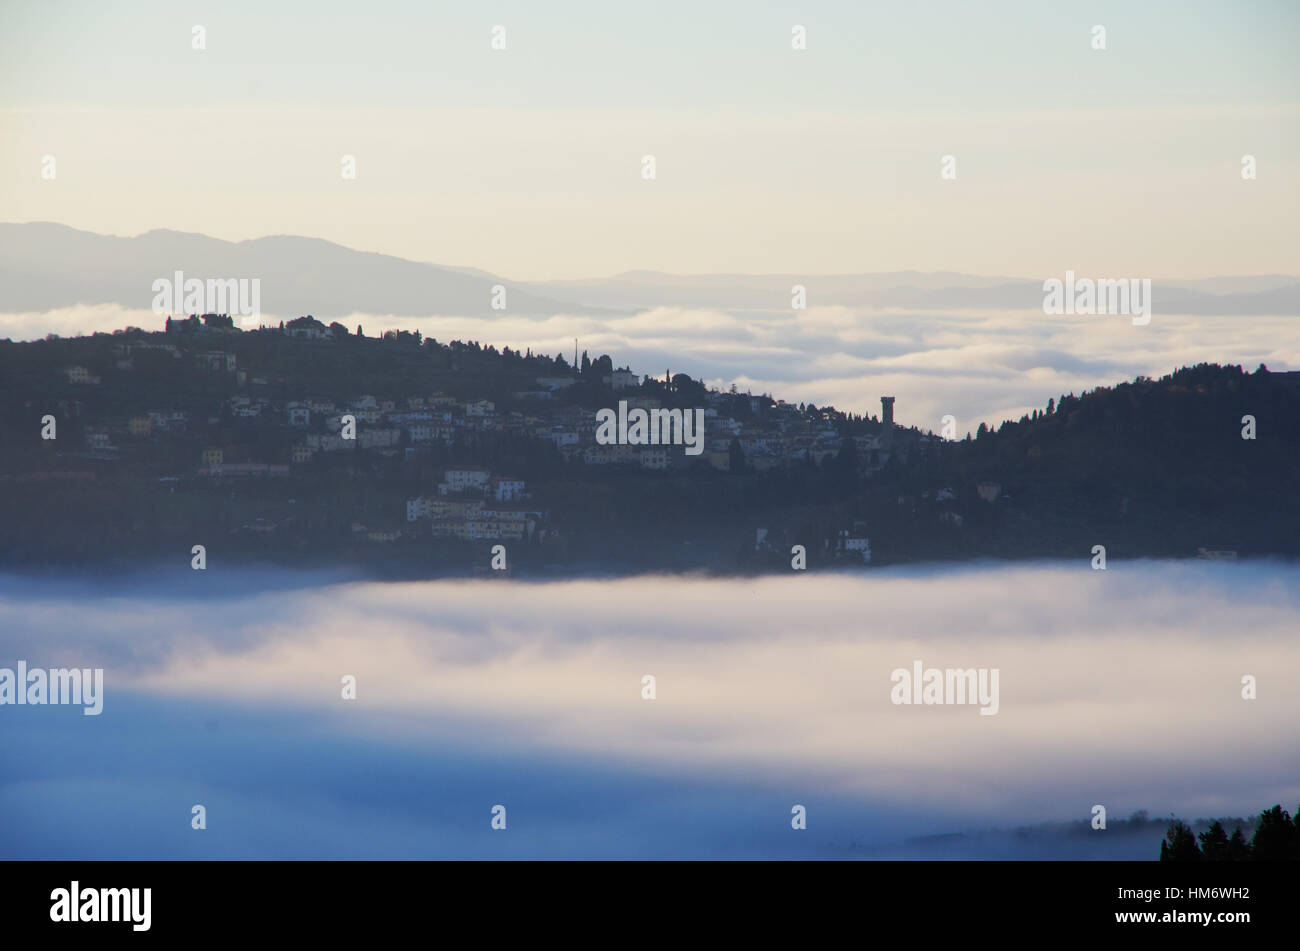 Tuscany hills with autumn colours, fog in the valleys and view of Fiesole. Stock Photo